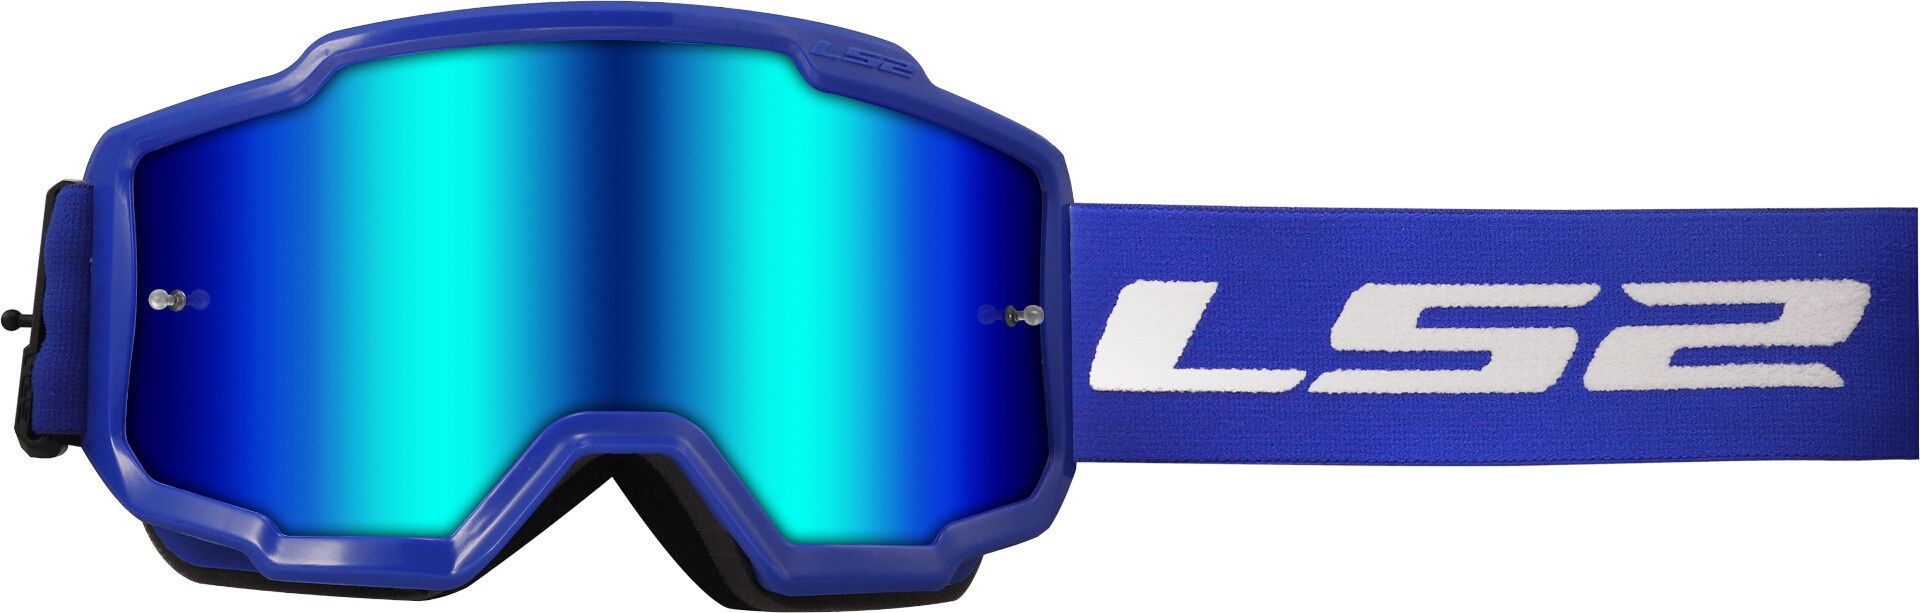 LS2 Charger Motorcross bril, blauw